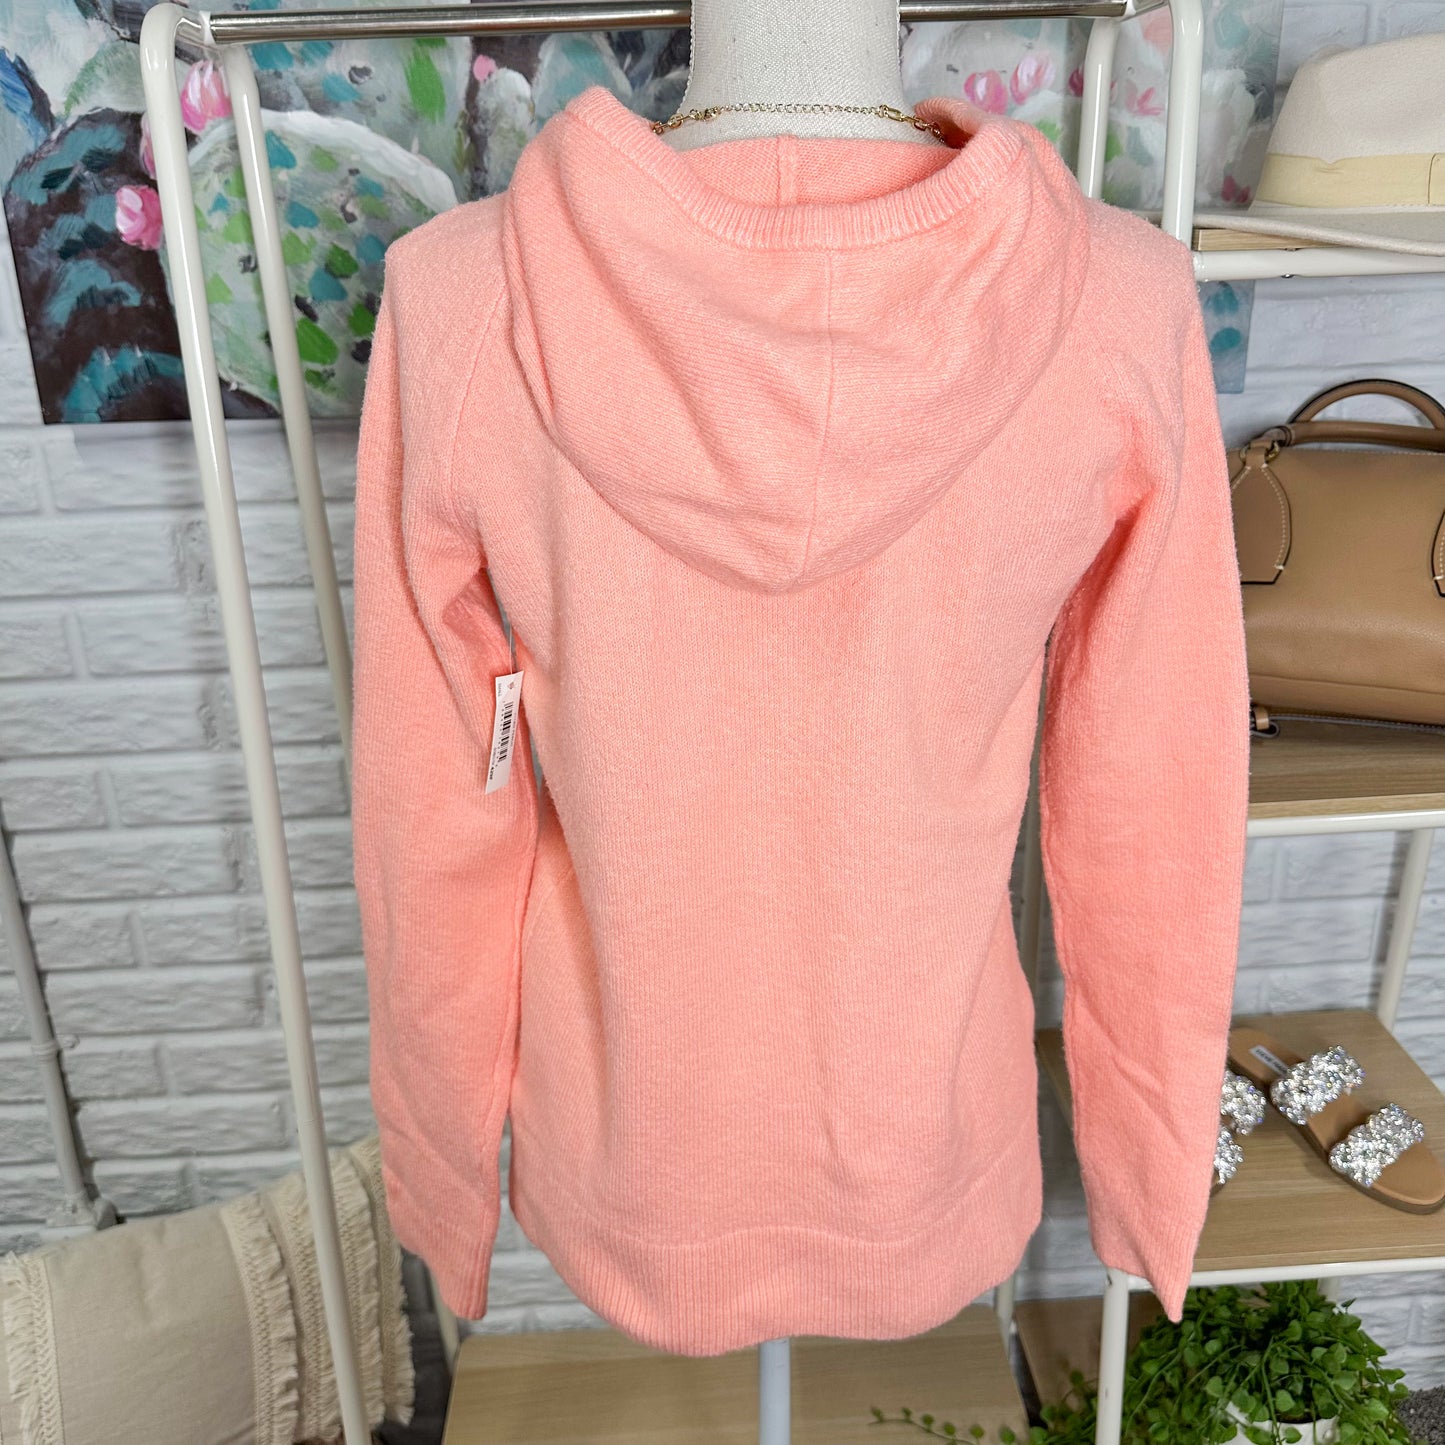 Amazon Essentials New Peach Soft Touch Hoodie Size Small